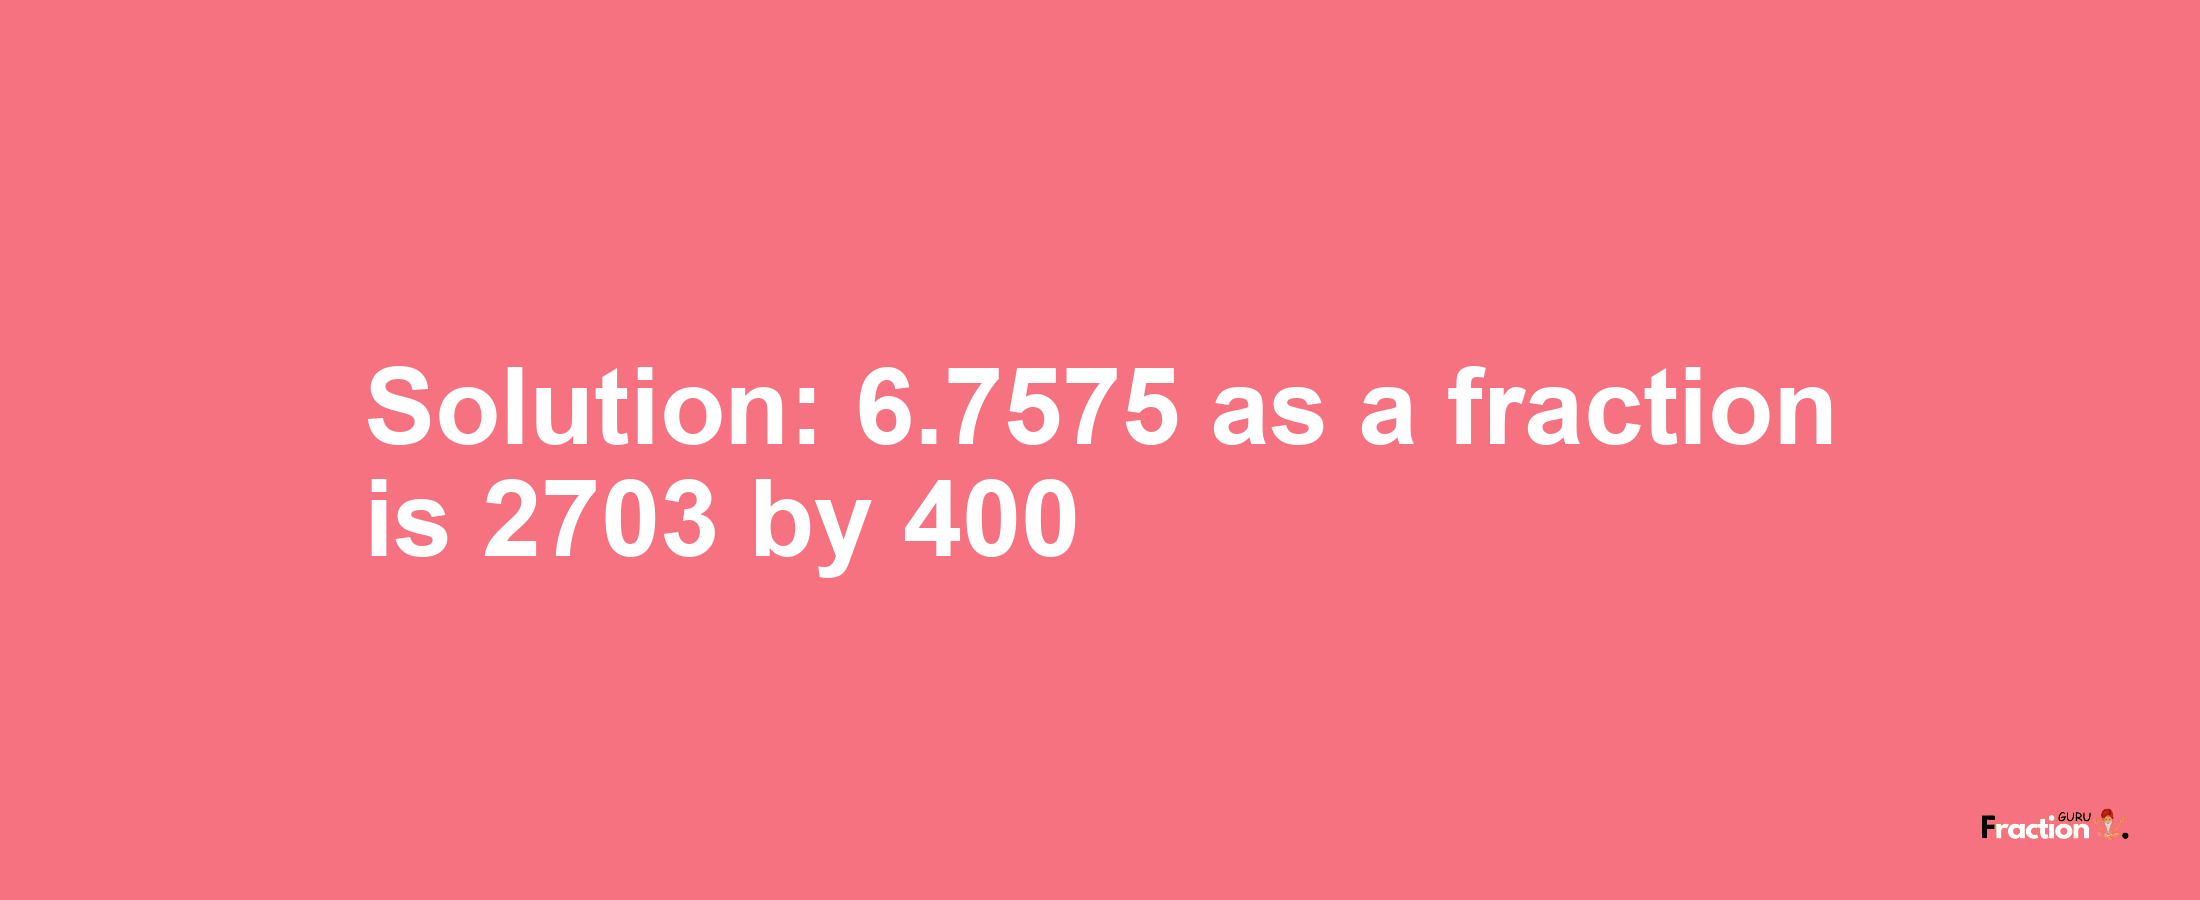 Solution:6.7575 as a fraction is 2703/400